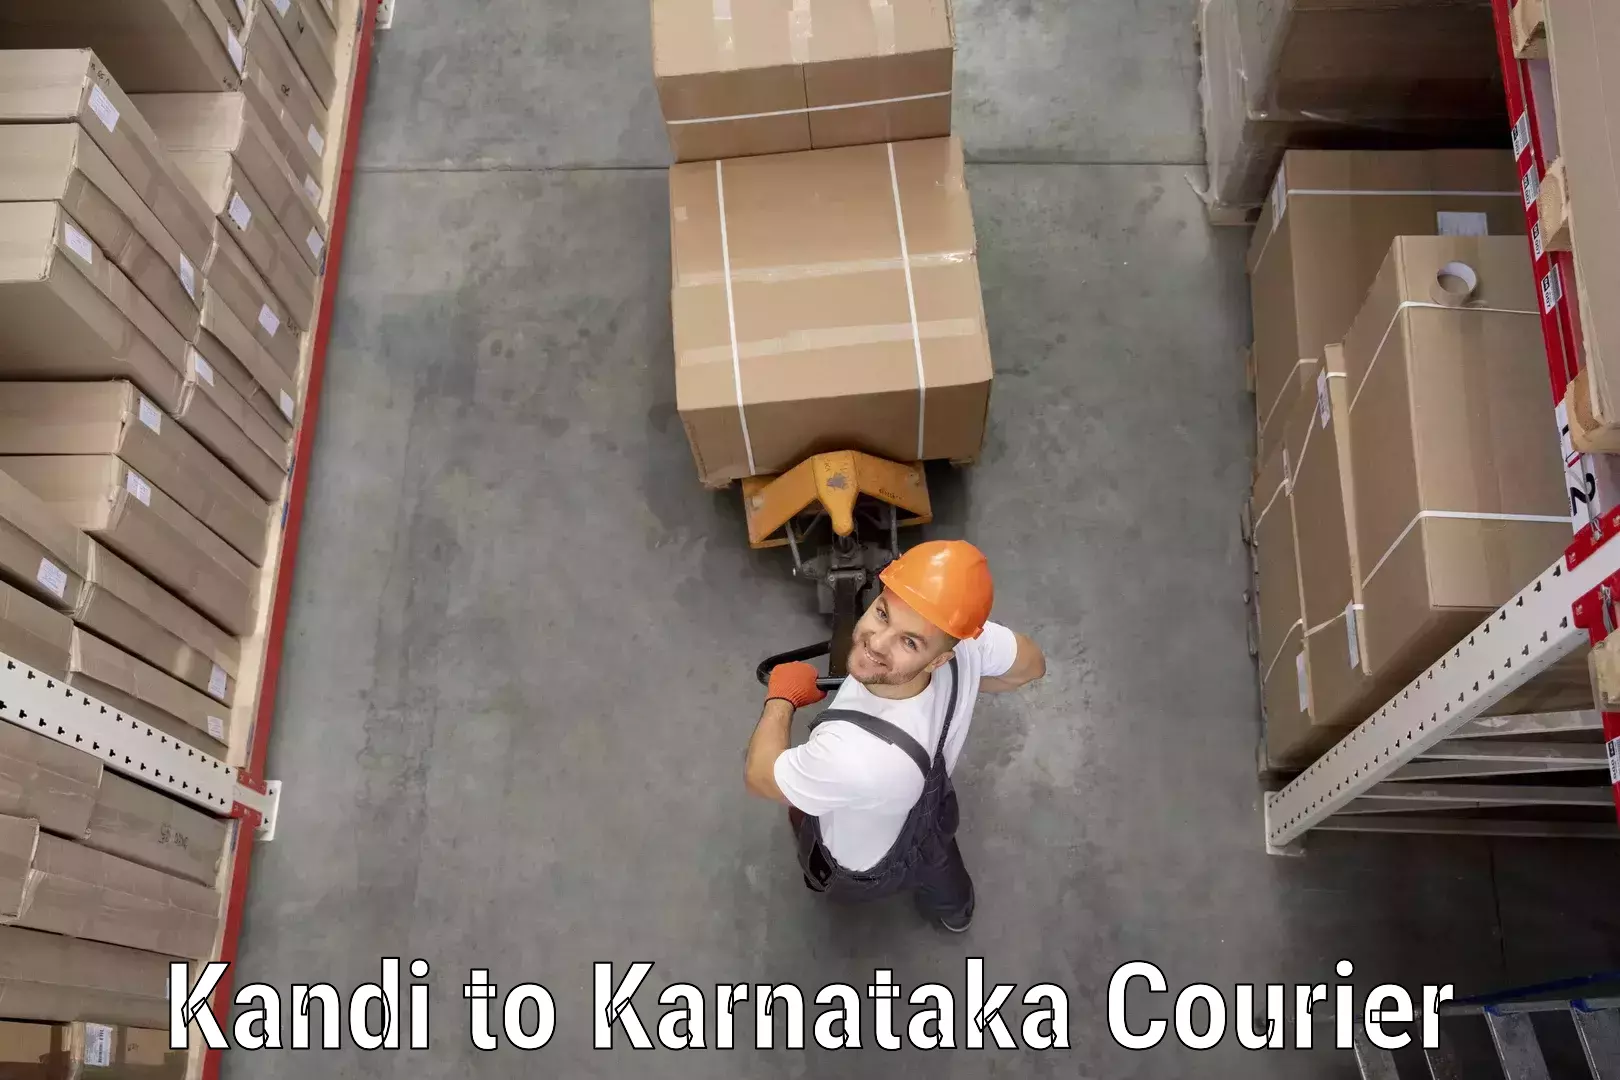 Reliable courier services in Kandi to Kollegal